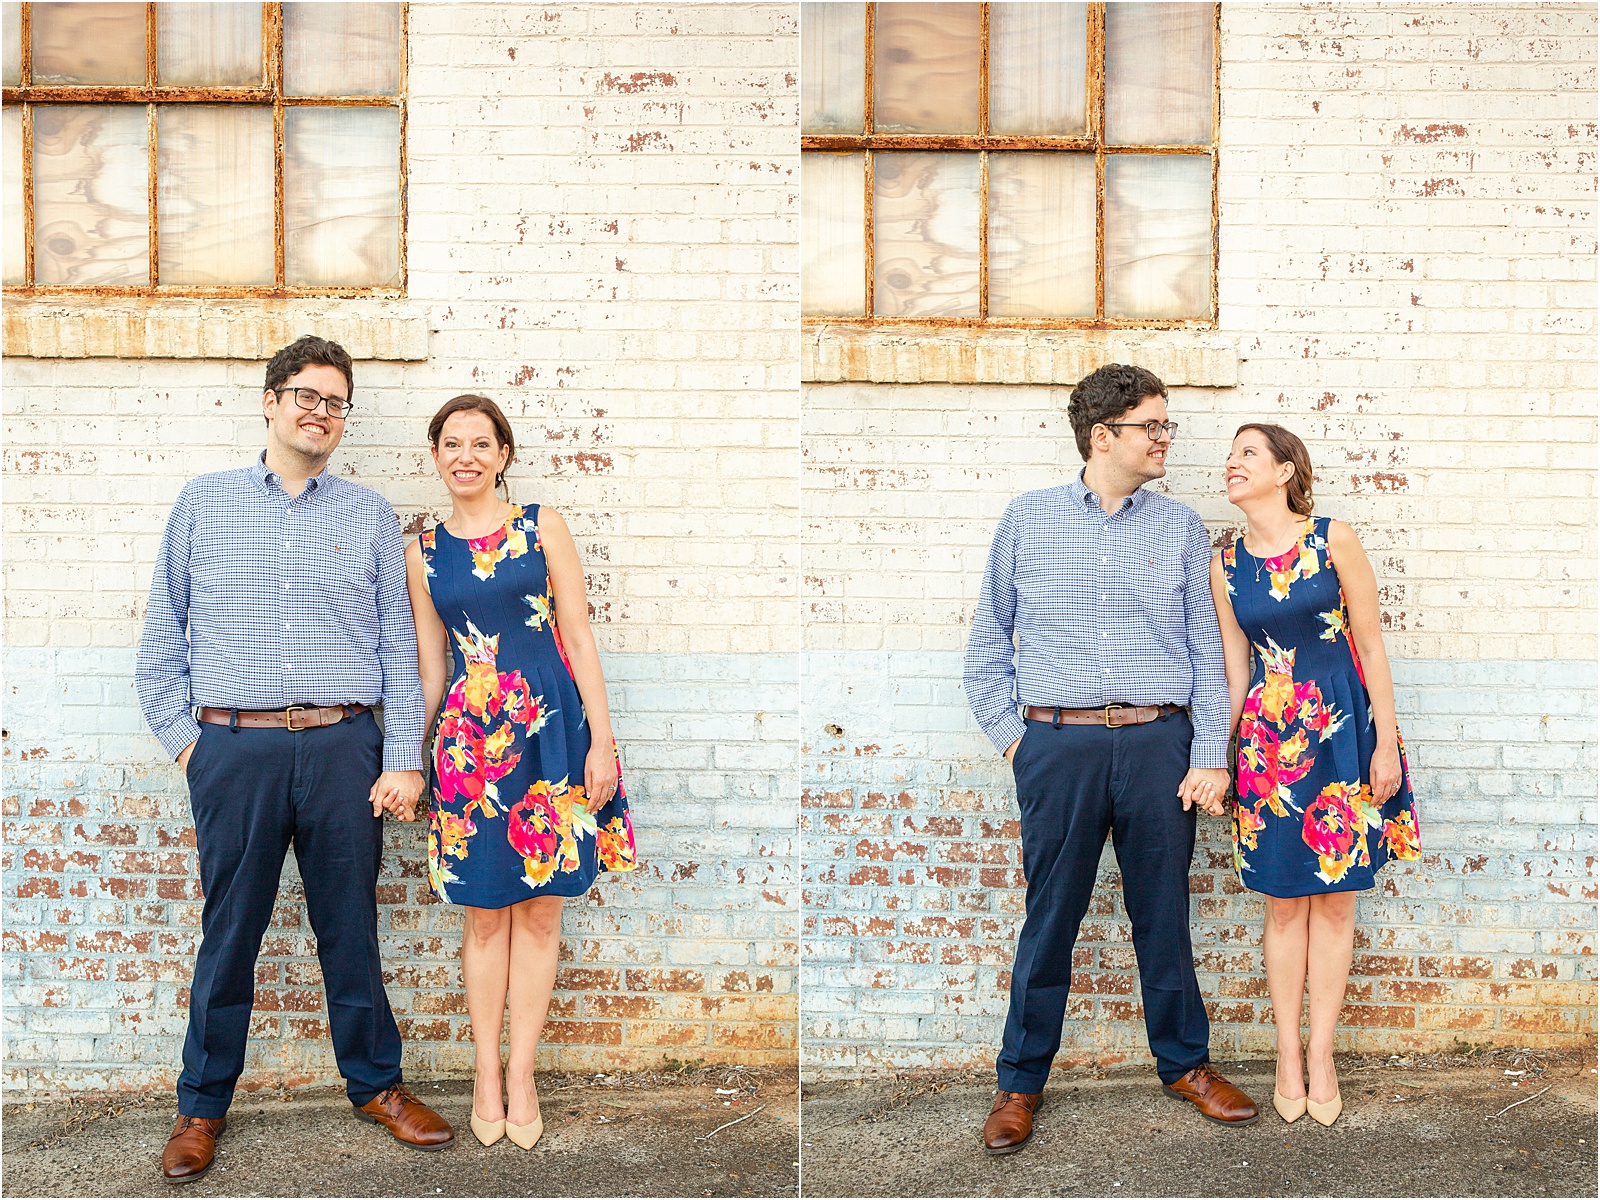 Engaged couple standing in front of brick wall holding hands